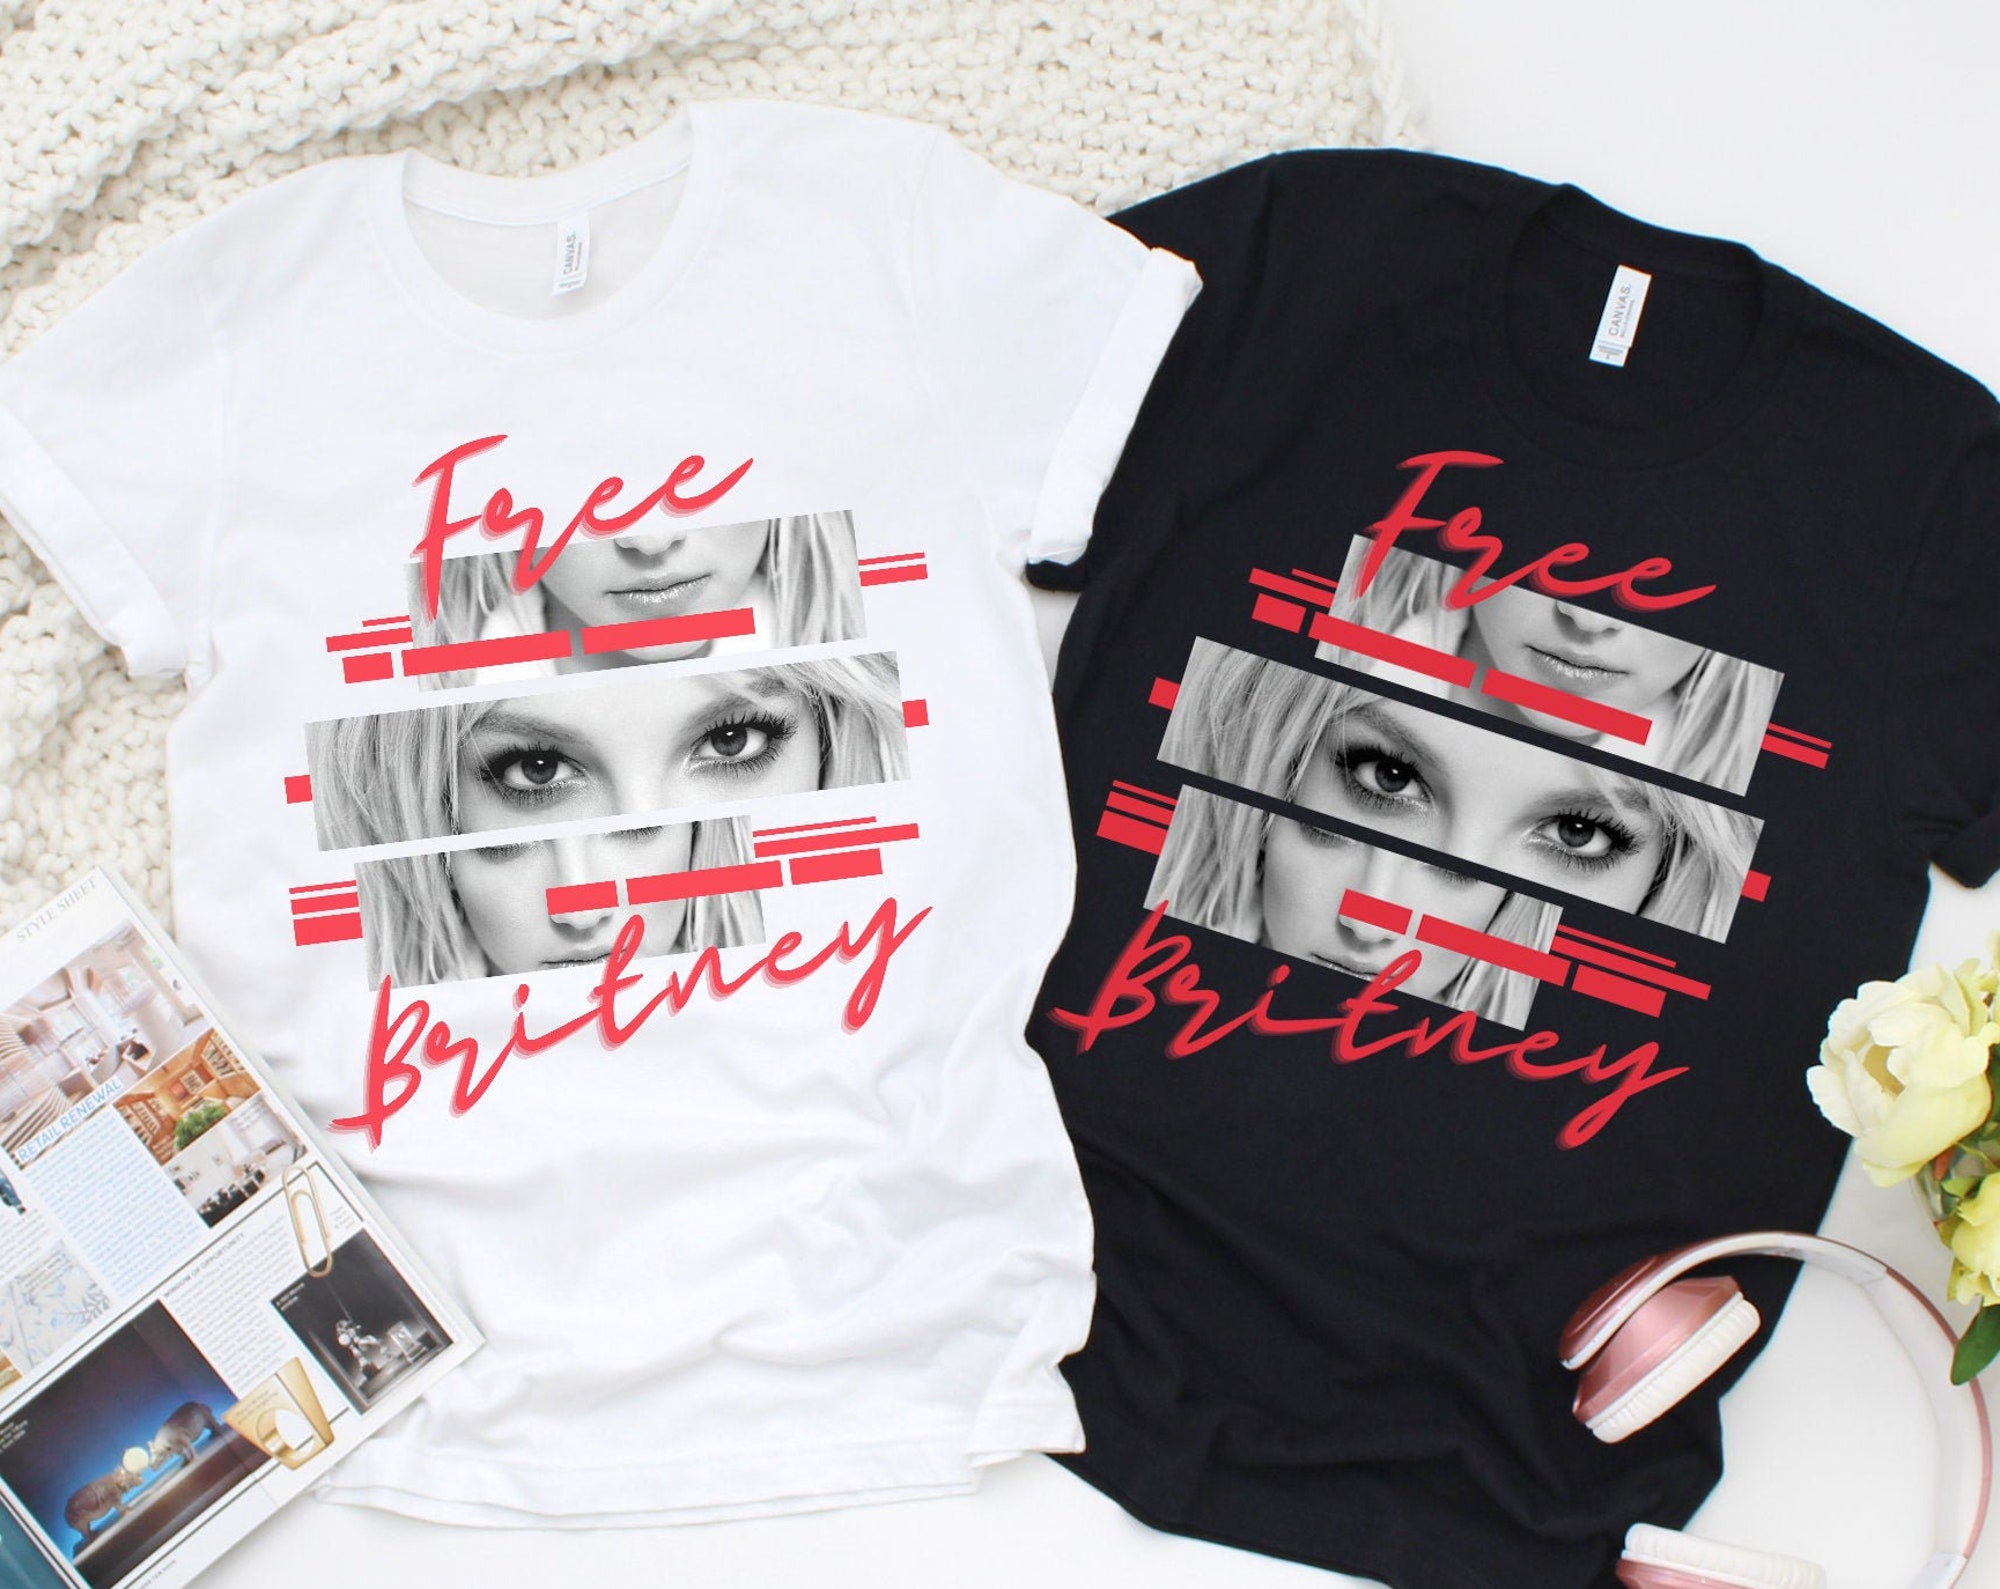 Discover Free Britney Shirt,Free Britney Spears Shirt